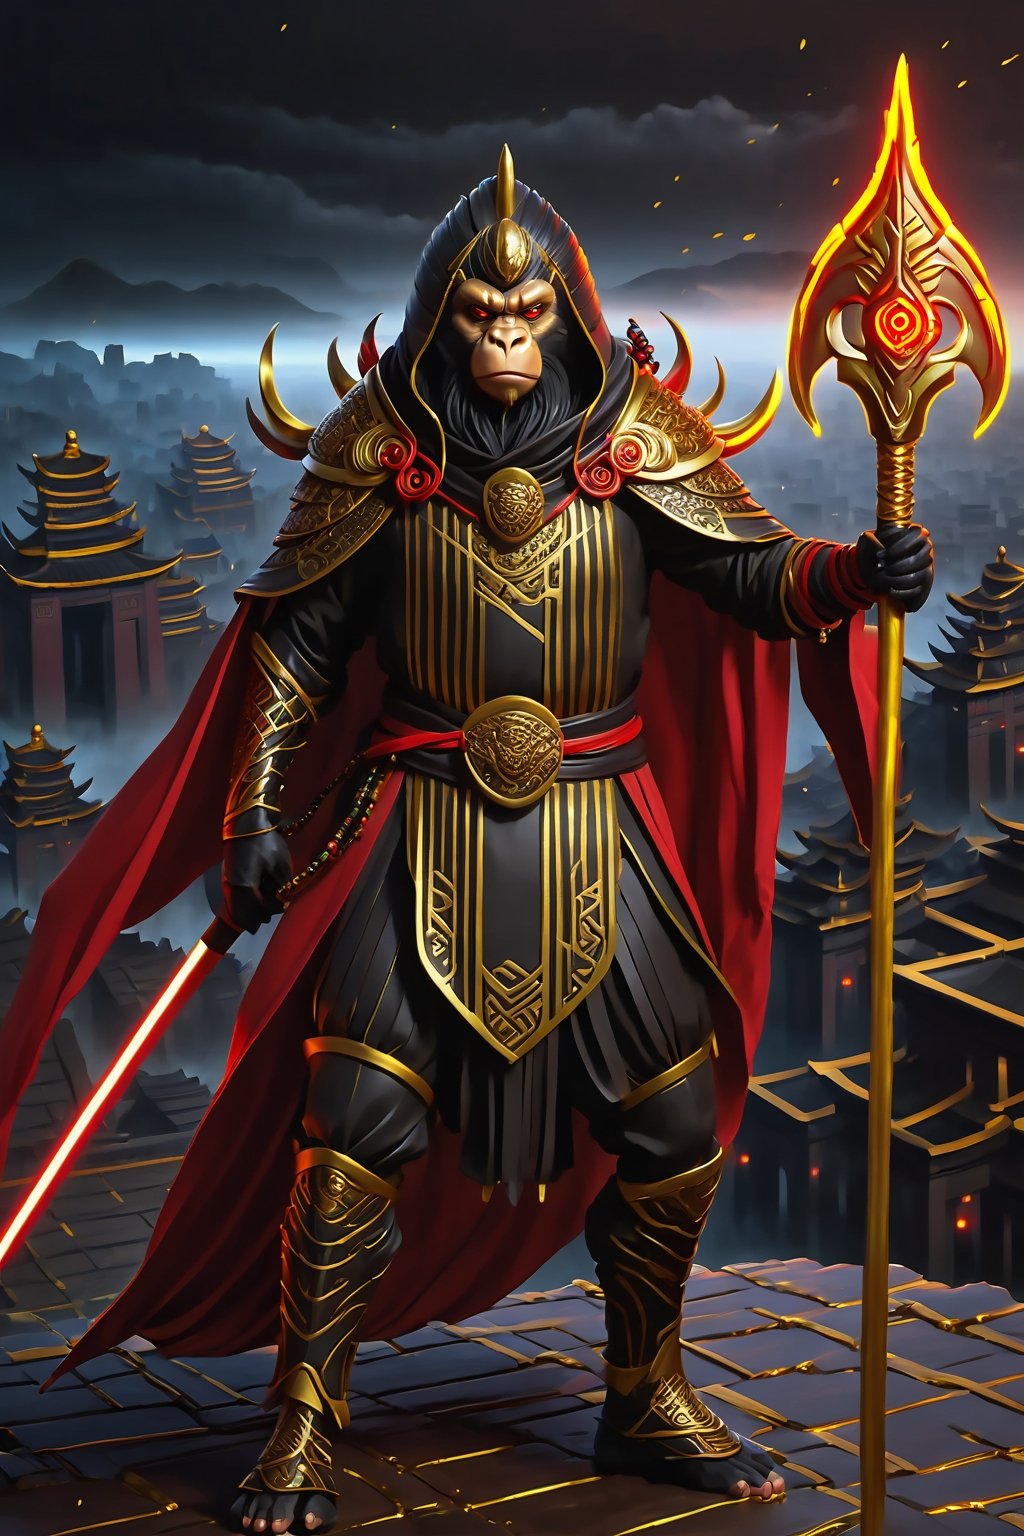 a man  Mythical hero Monkey-like features Playful yet serious expression Humanoid figure Expressive facial features Mystical aura Iconic headband Tail  
Ancient city Ultra-fine painting
Black armor
Red cloak
Fierce expression
Yellow metal staff
Indomitable will
Invincible aura
Lonely guardian
Warring States, Three Kingdoms style
Aerial view
Ferocious face
Sharp eyes
Fluttering armor and cloak
Ruined ancient city
Desolate atmosphere
Central figure
Dark sky
Dark, gray, brown tones
Red and gold highlights


3D Realistic Style Highly detailed 4k, 8k, highres: 4K, 8K
Realistic, photorealistic, photo-realistic, in the style of esao andrews,DonM3lv3nM4g1cXL,LegendDarkFantasy,shards,ral-chrcrts,Movie Still